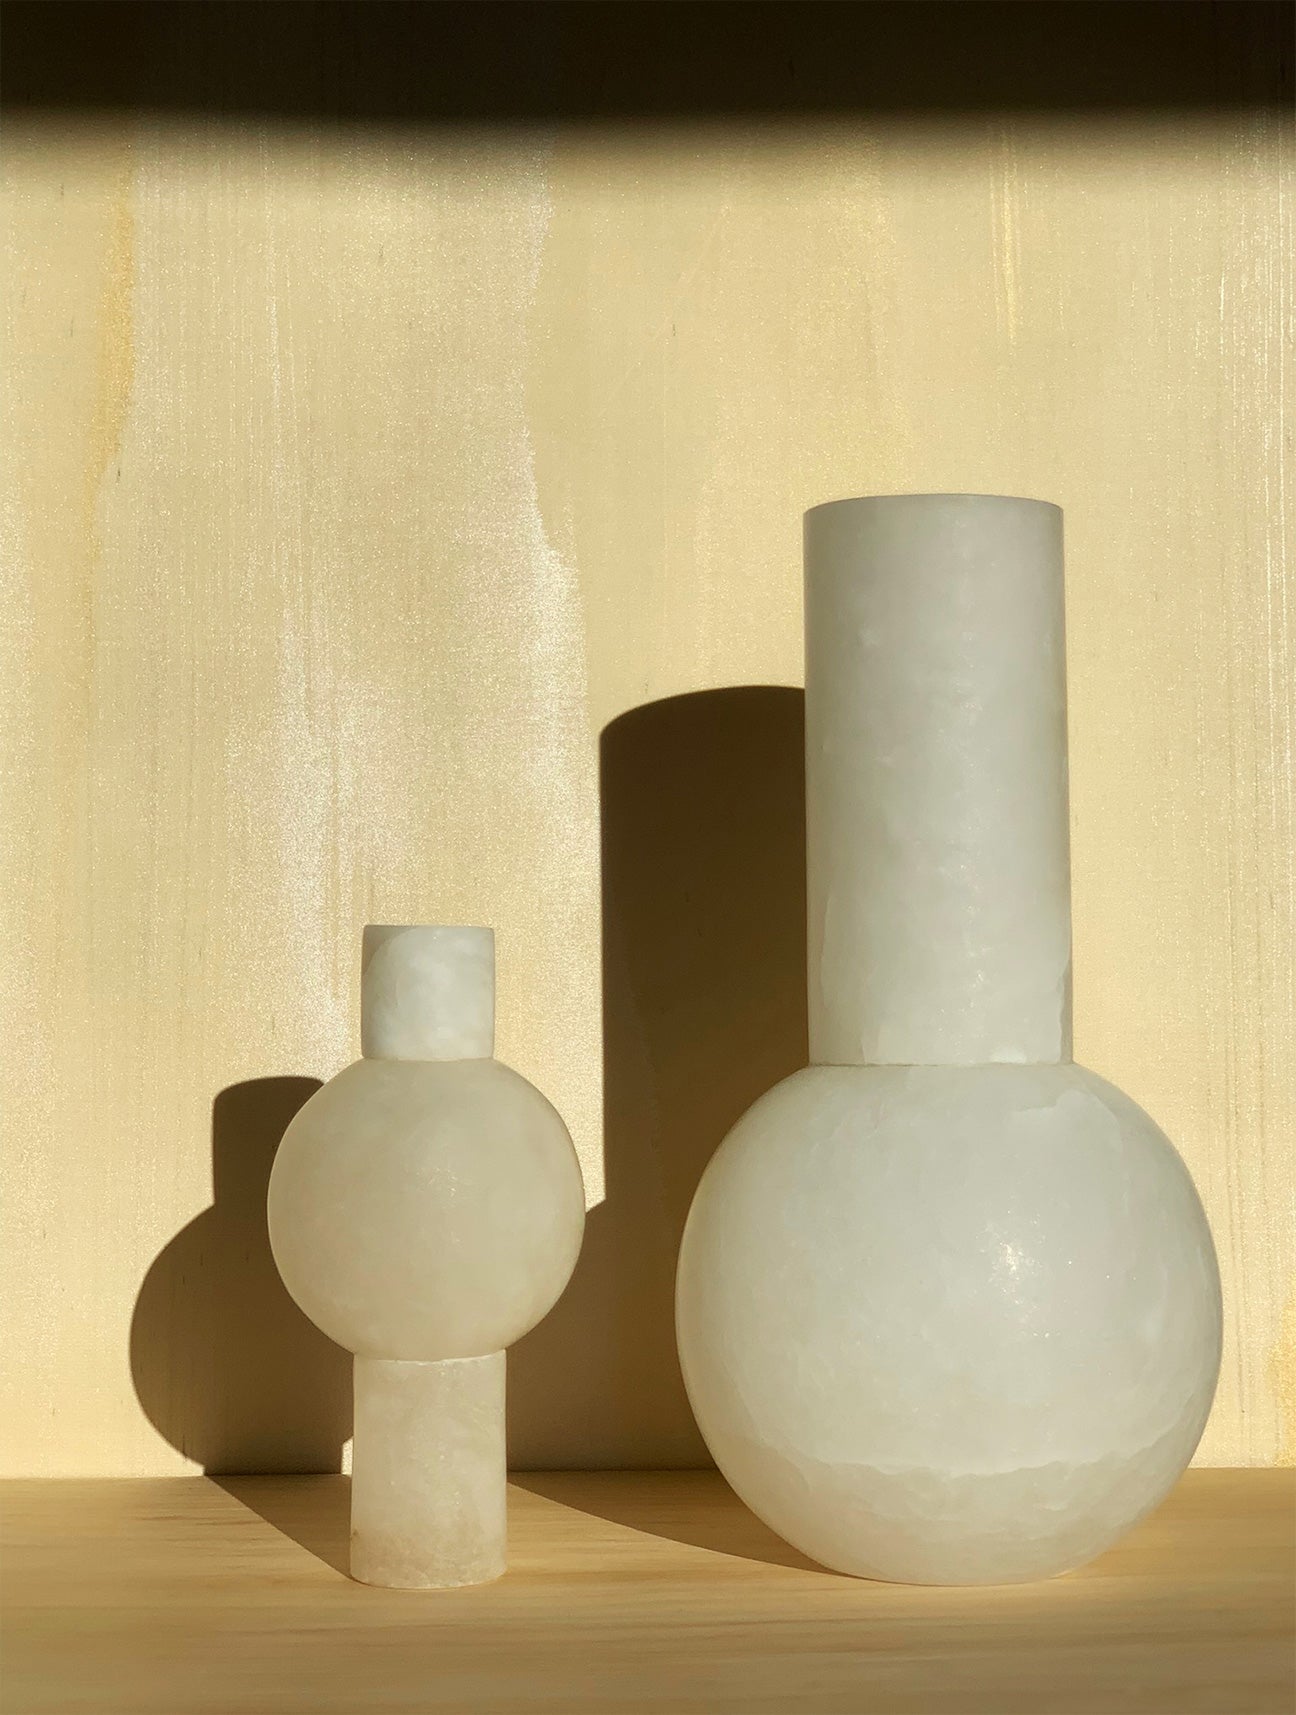 Image of M+A Keyhole Vase next to Lolita Vase, both in alabaster.  Sitting in front of wallpaper by Fromental Design in the pattern "Travertine".